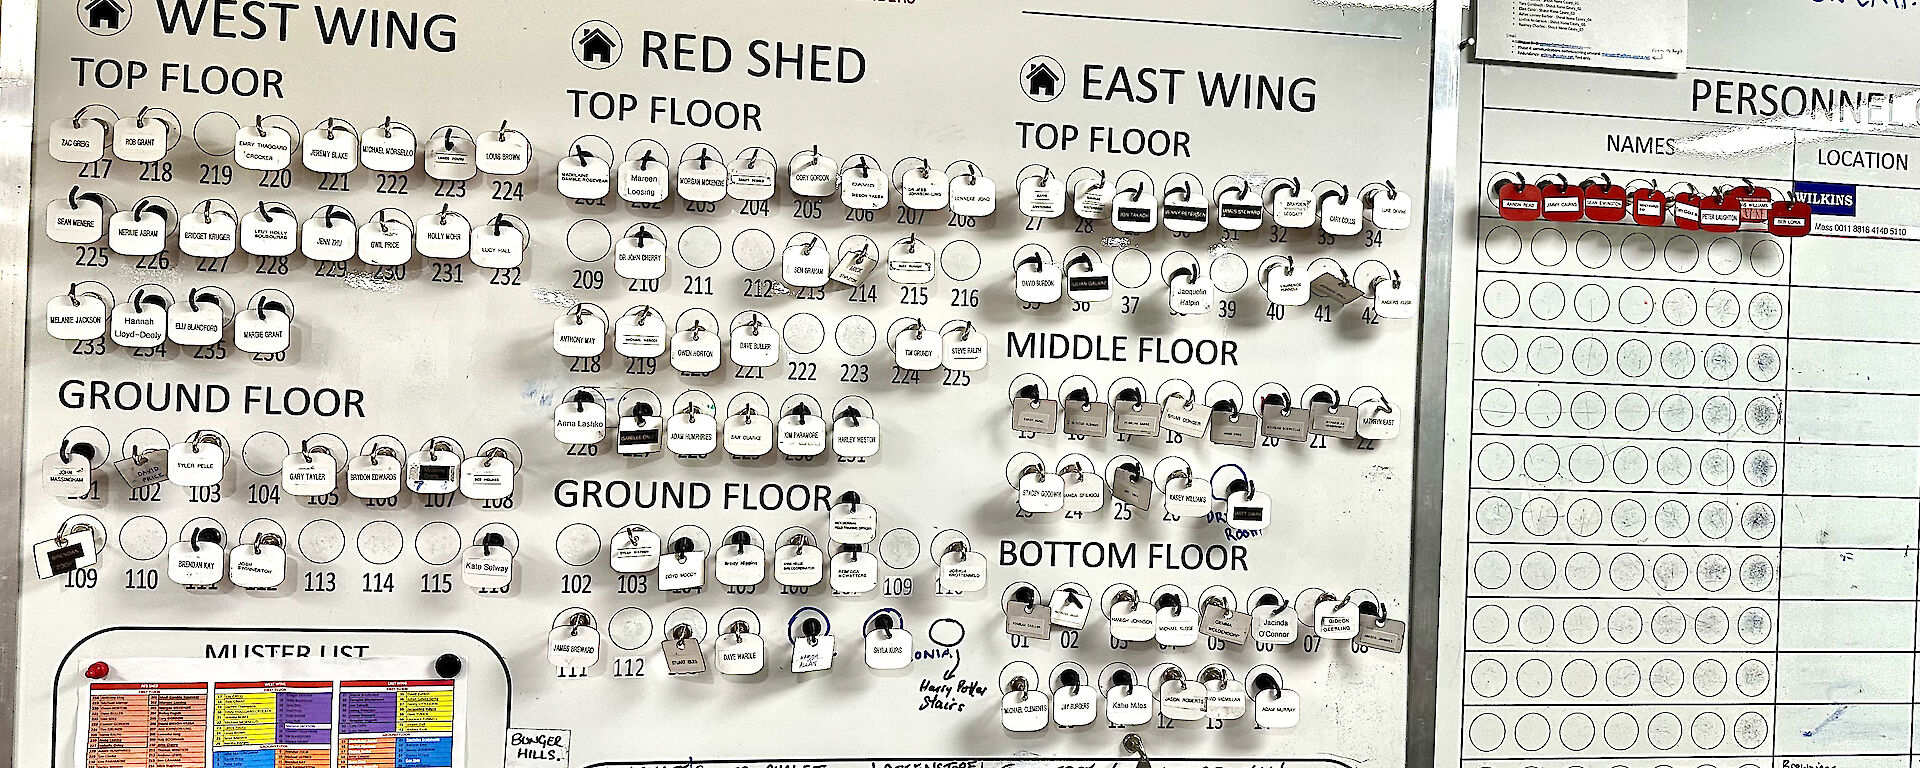 Muster board with over 150 personnel tags